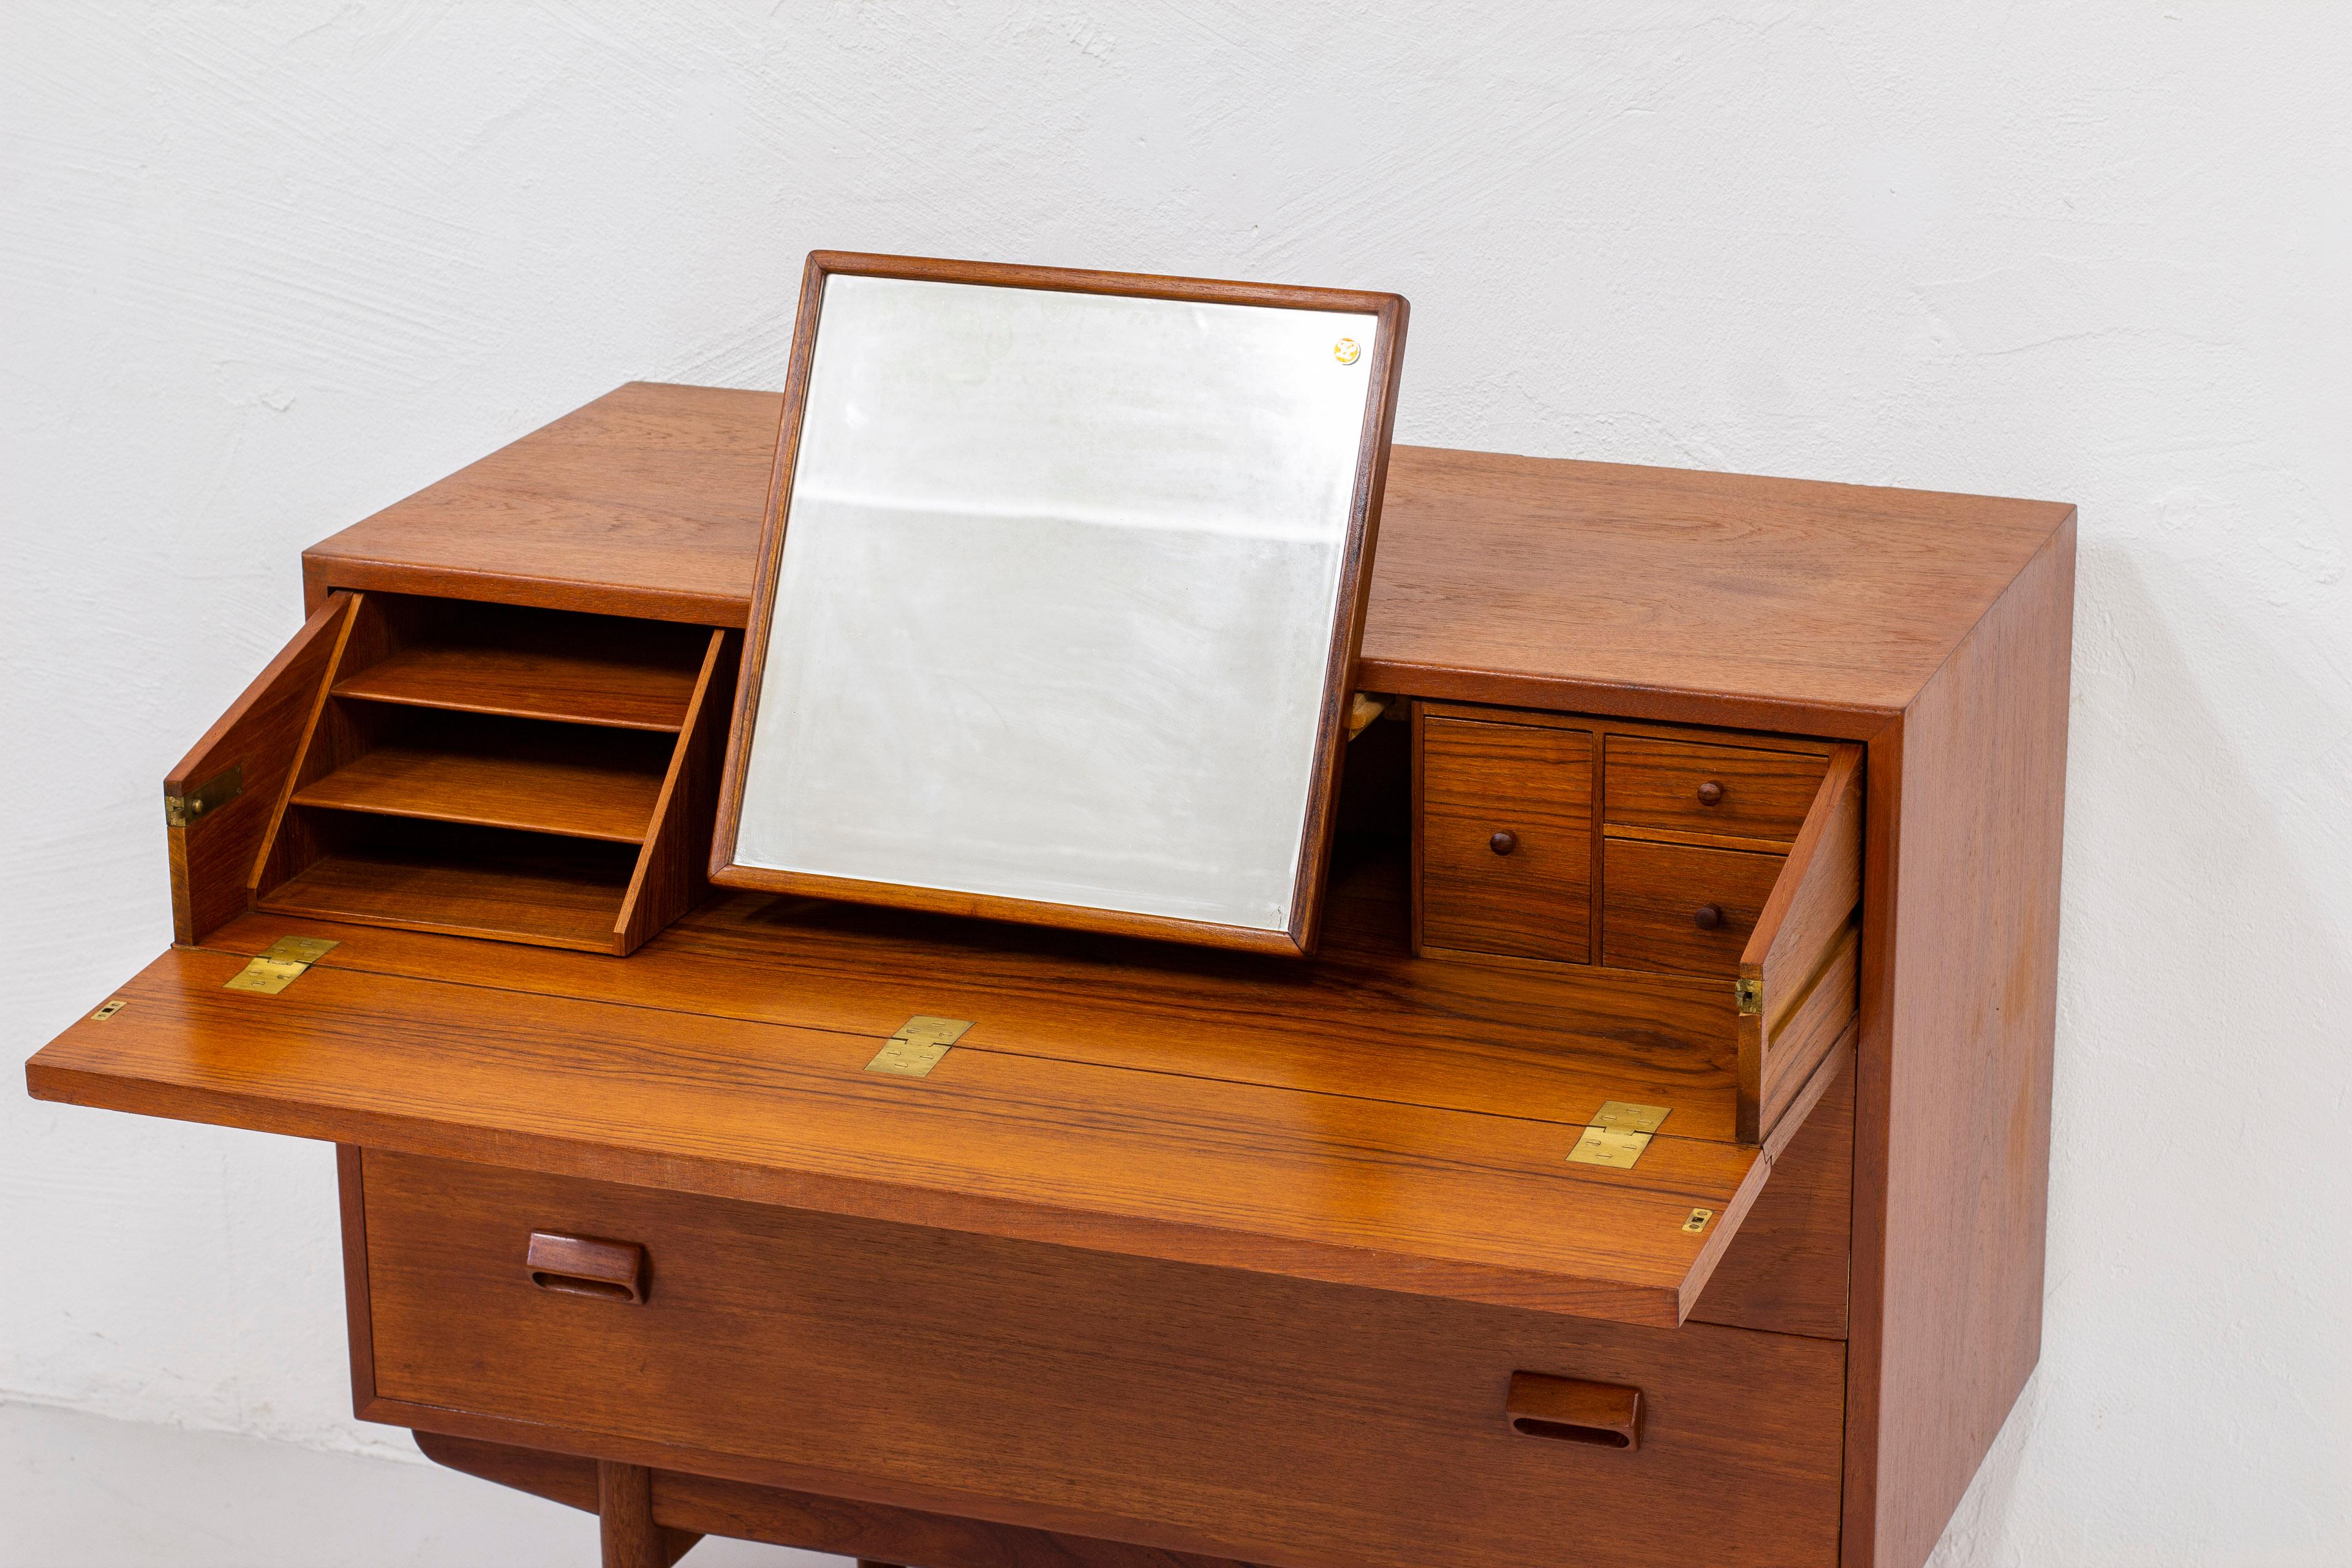 Mid-20th Century Chest of Drawers with Built in Vanity Dresser by Børge Mogensen, Teak, 1950s